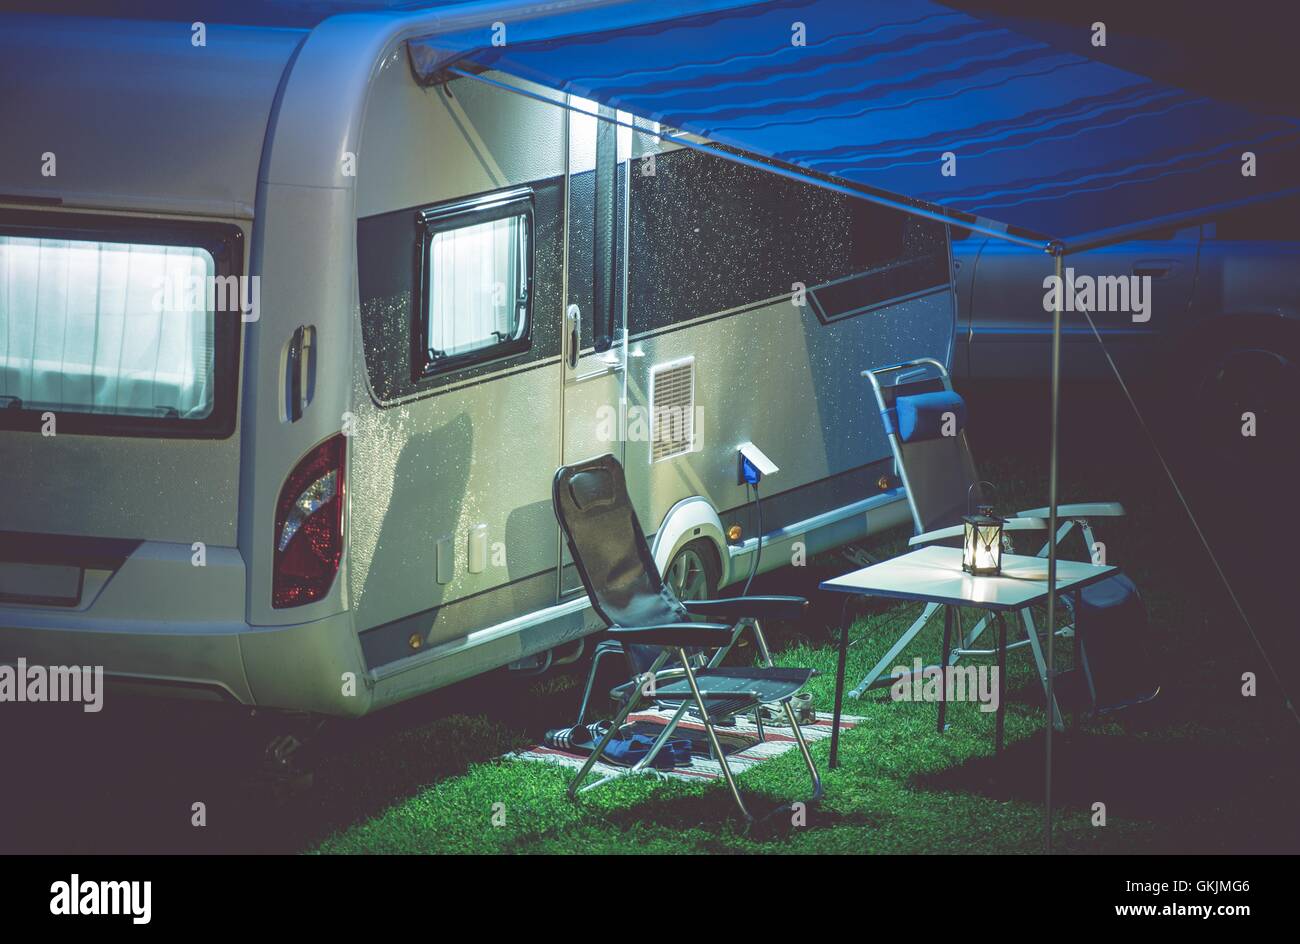 Travel Trailer Camping Romantic Setup. Modern Travel Trailer and Camping Furnitures Under the Awning. Modern Caravaning. Stock Photo